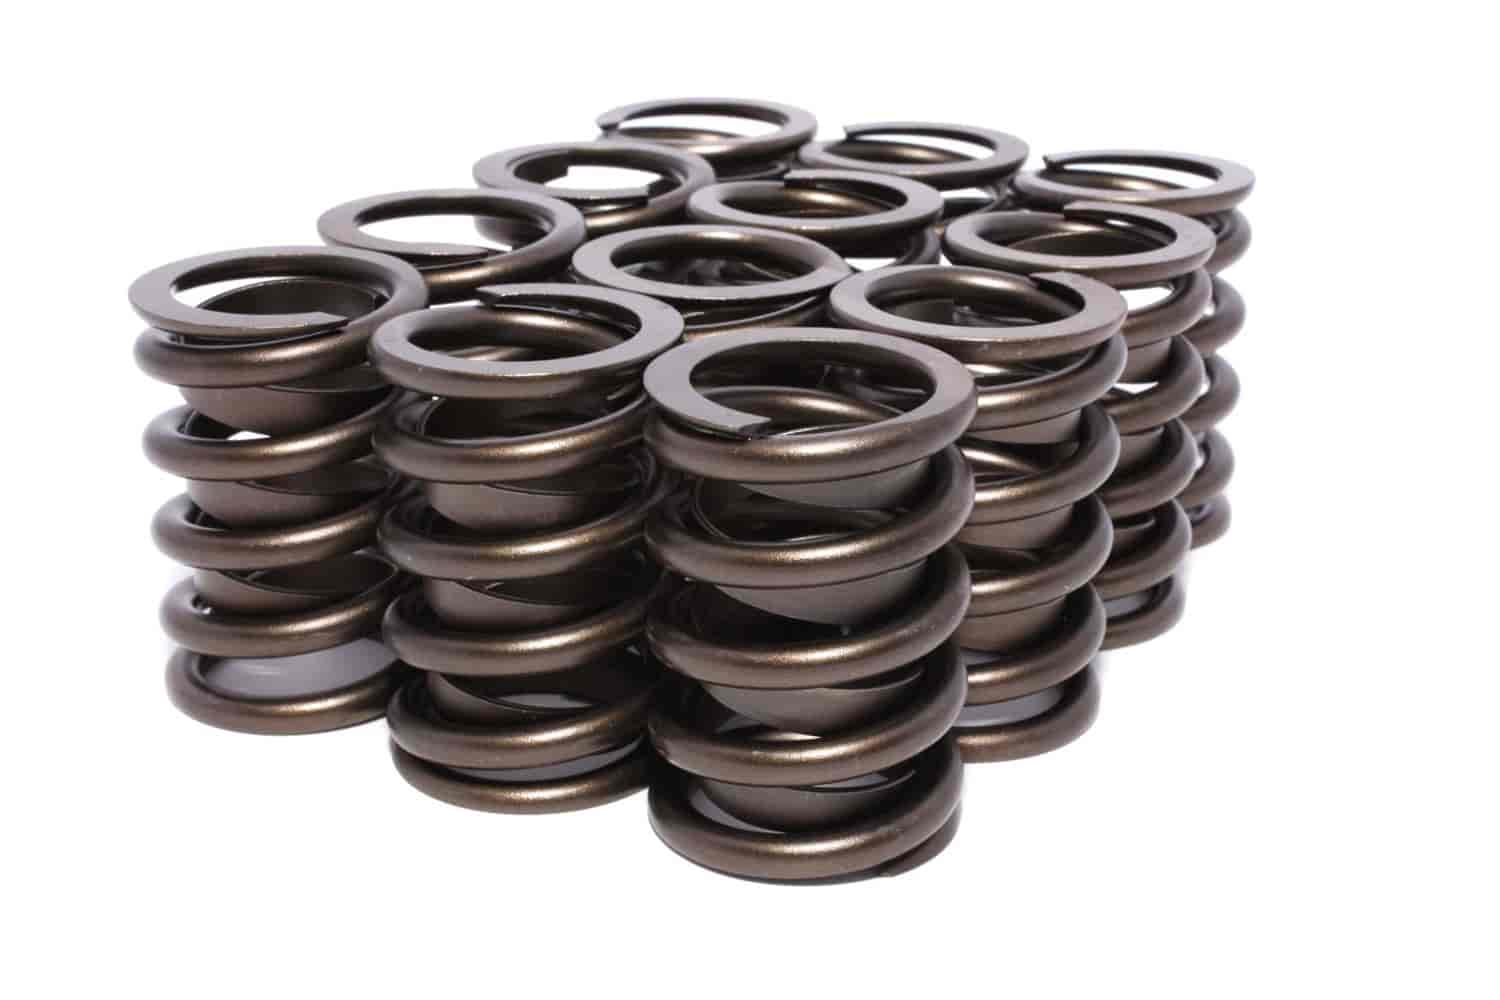 Single Outer Valve Springs Rate: 269 lbs